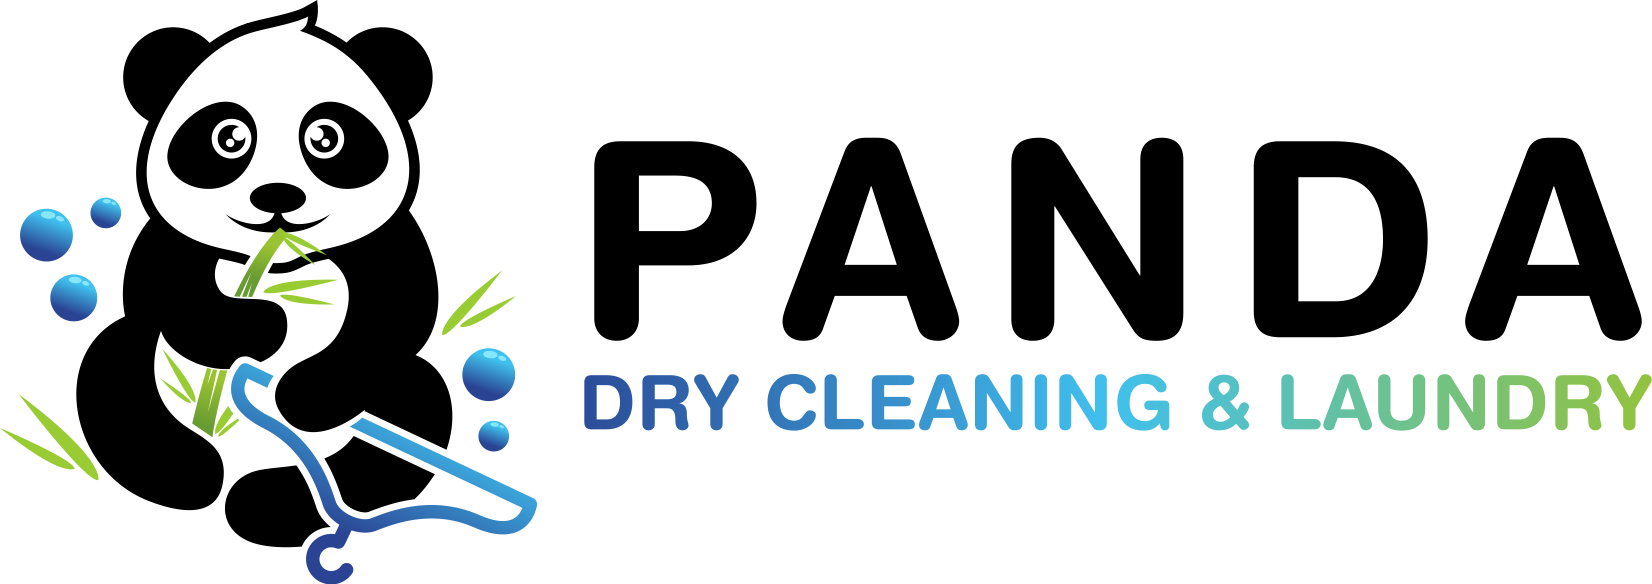 Panda Dry Cleaning & Laundry